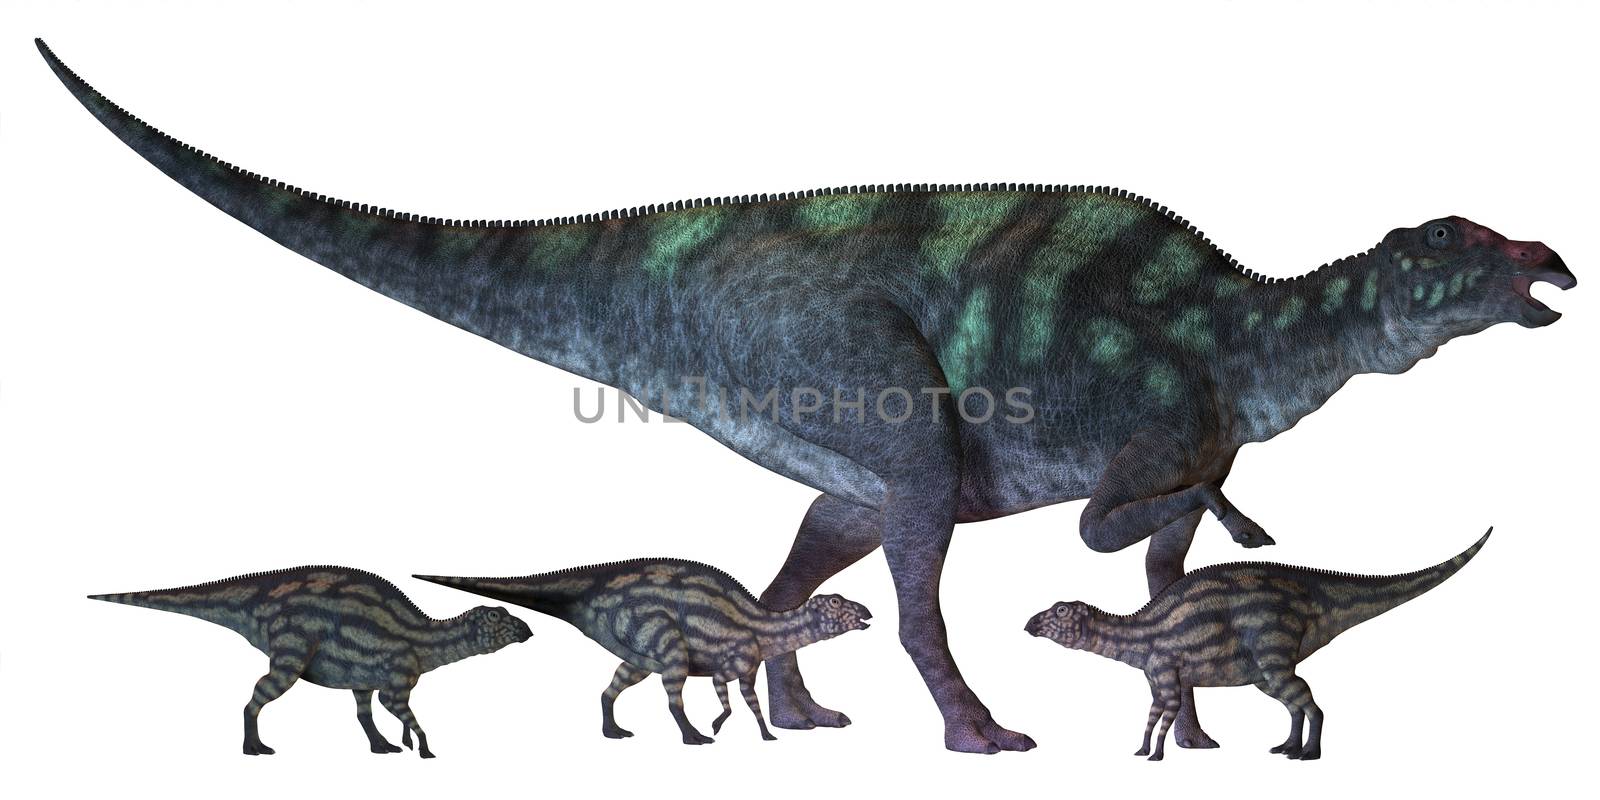 Maiasaura is a large duck-billed dinosaur that lived in North America in the Cretaceous Era shown here with several hatchlings.